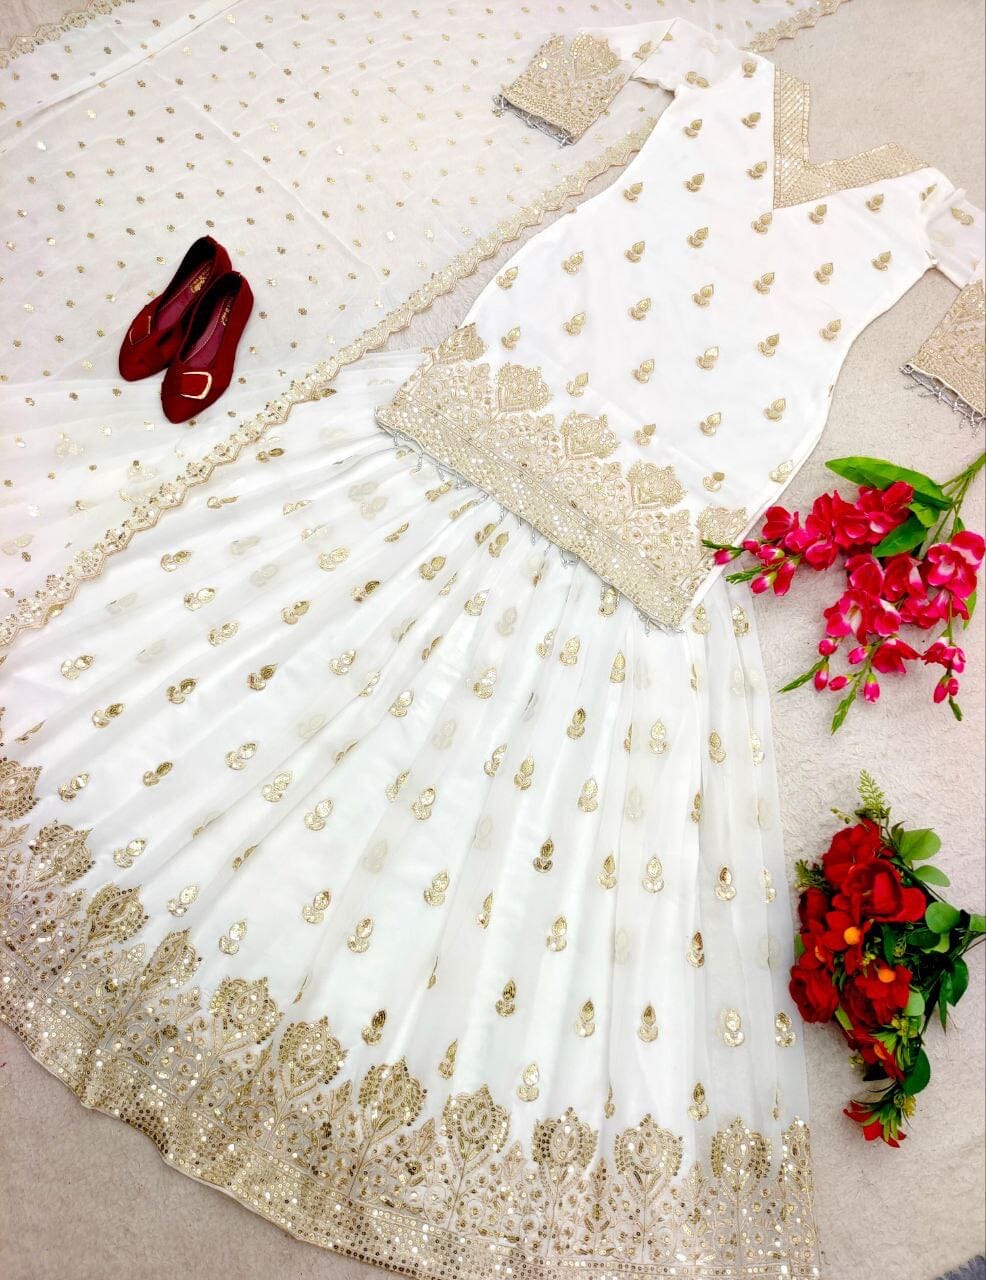 Designer White Sequence work Lehenga Readymade Suit Ready Made Designer Suits Shopin Di Apparels 